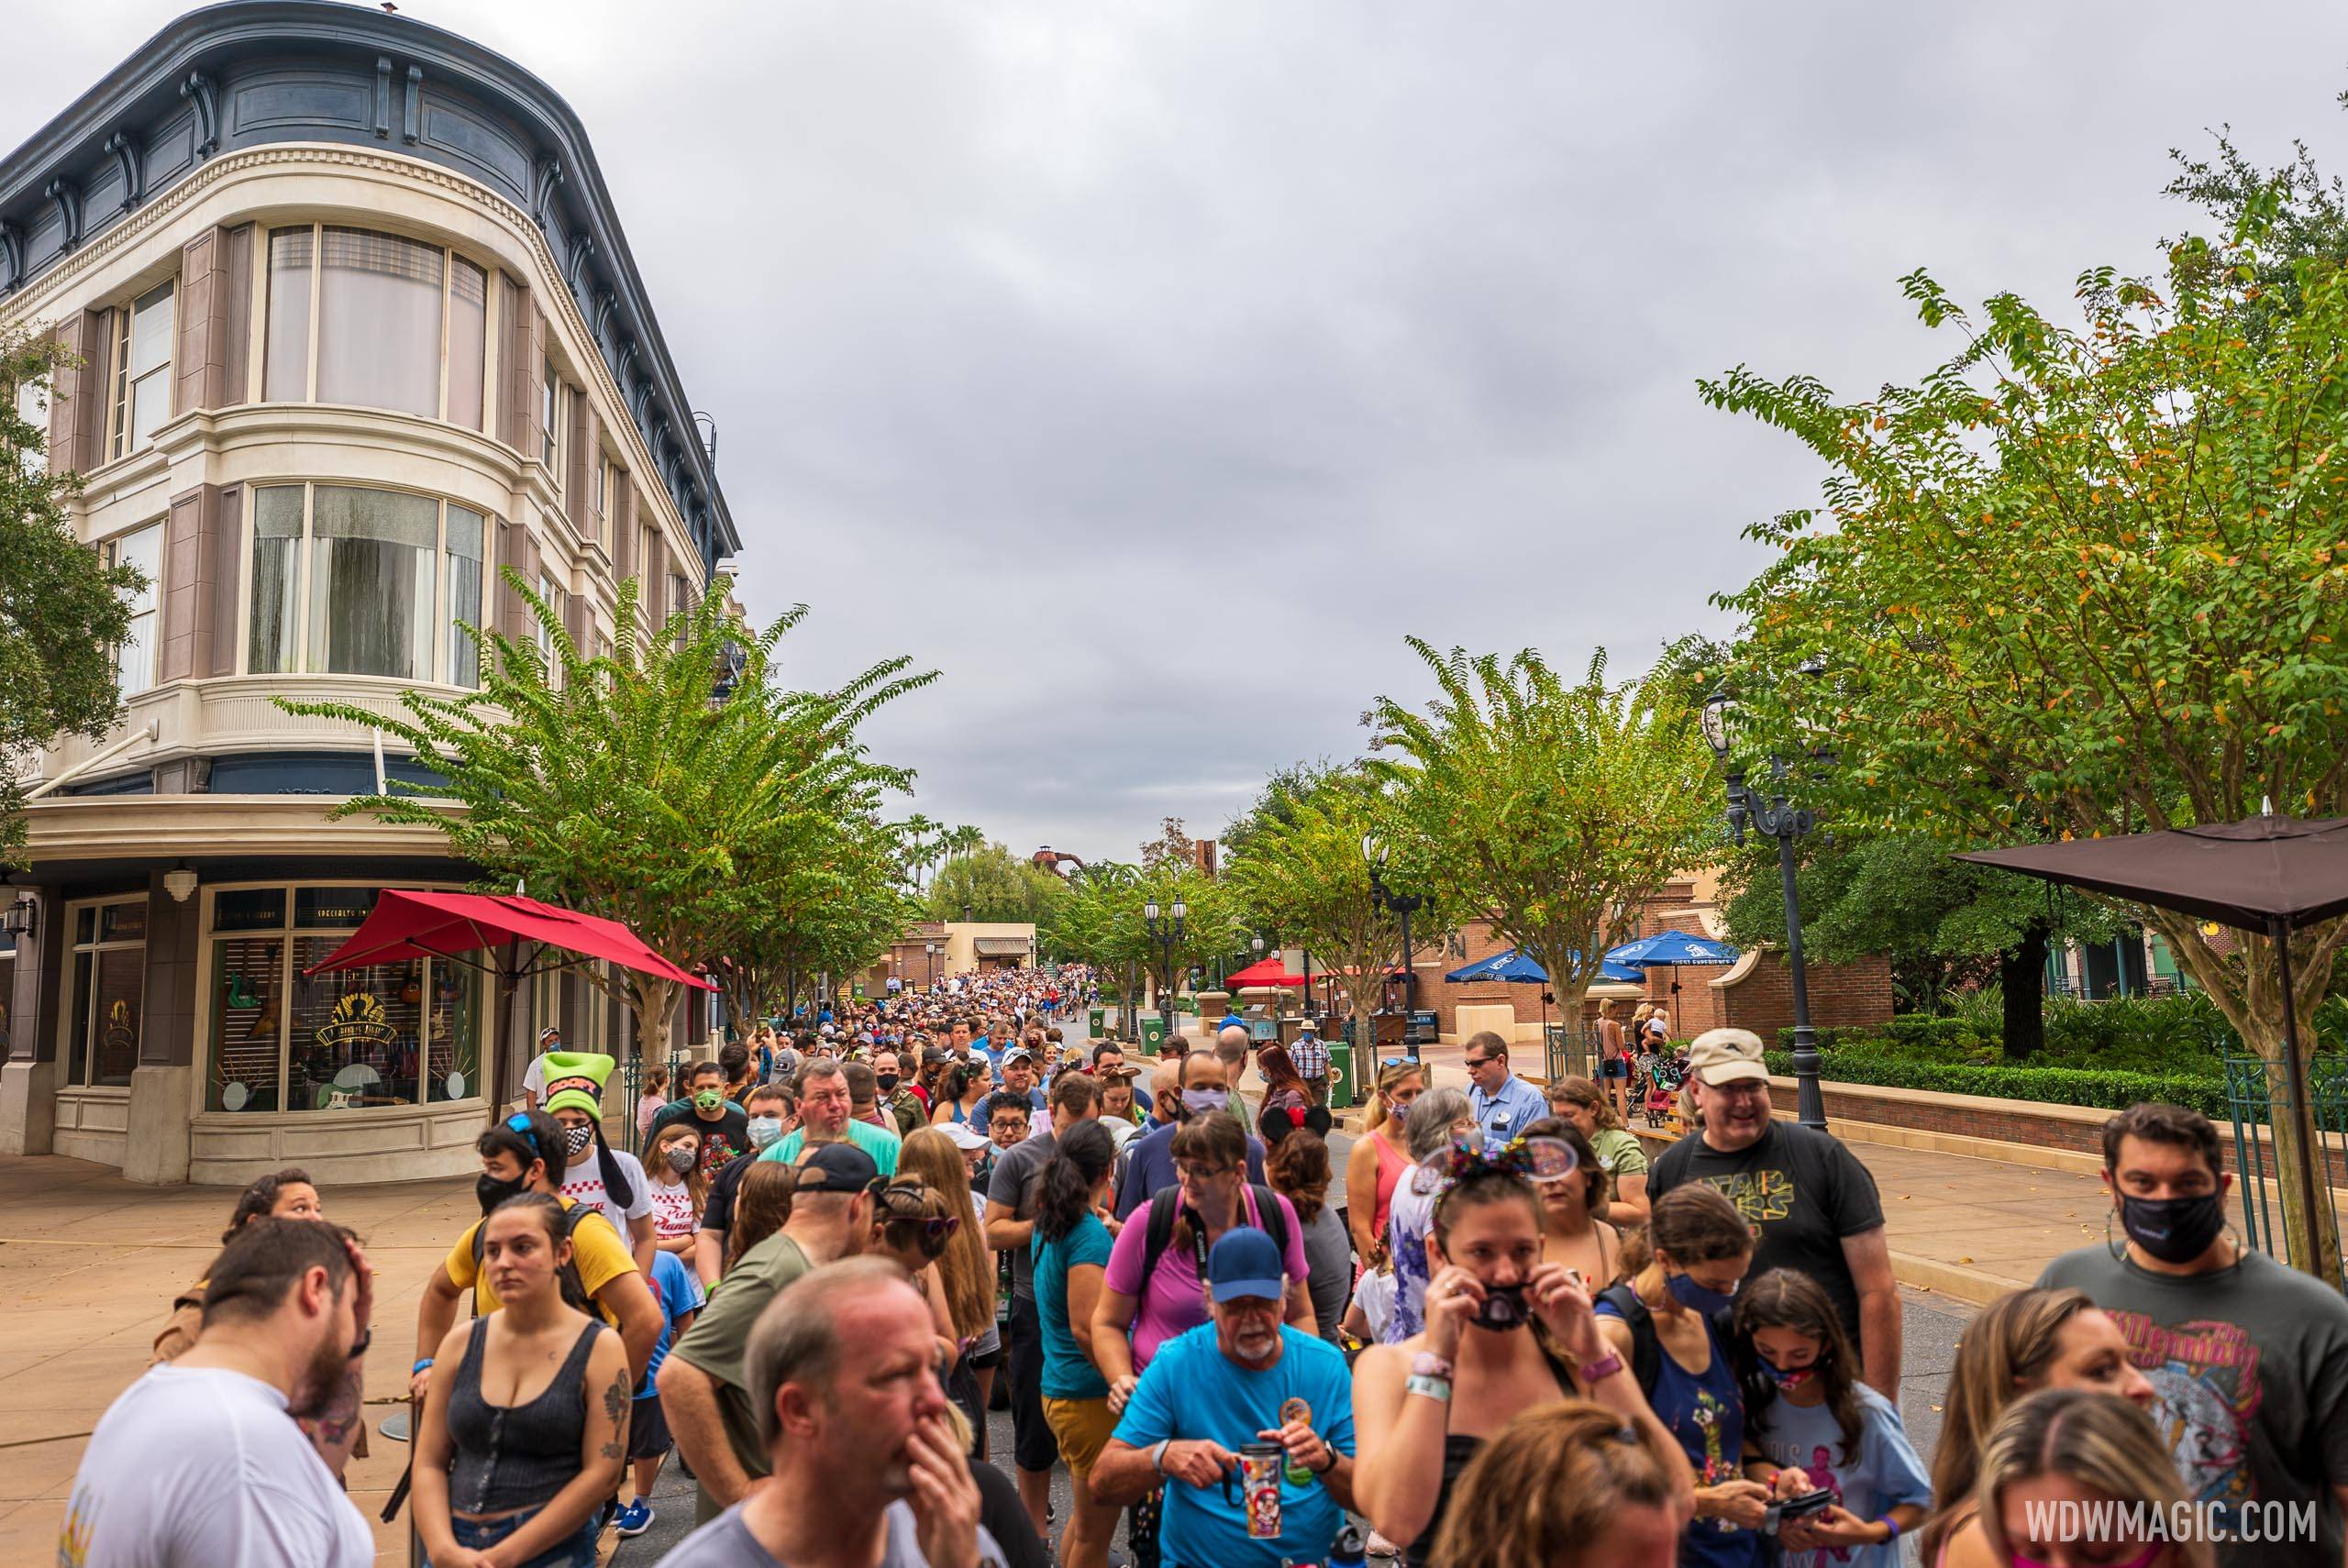 Looking back along the Star Wars Rise of the Resistance standby queue at 8:40am